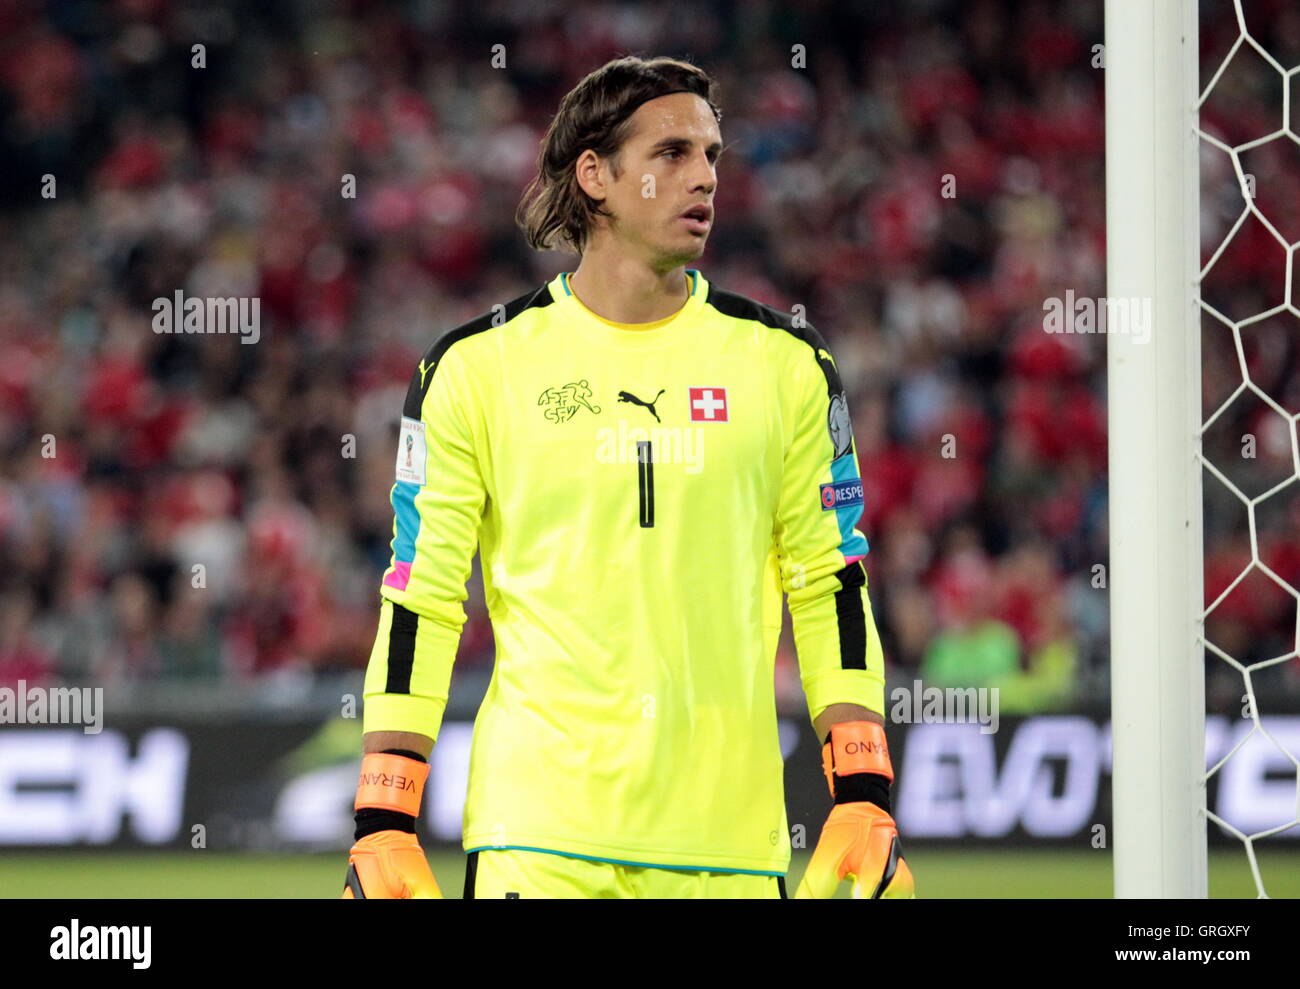 Basel, Switzerland. 6 September 2016 Yann Sommer in action during the qualifying match of the World Cup Group B Switzerland against Portugal at St Jakob Park in Basel, Switzerland Credit:  Laurent Lairys/Agence Locevaphotos/Alamy Live News Stock Photo